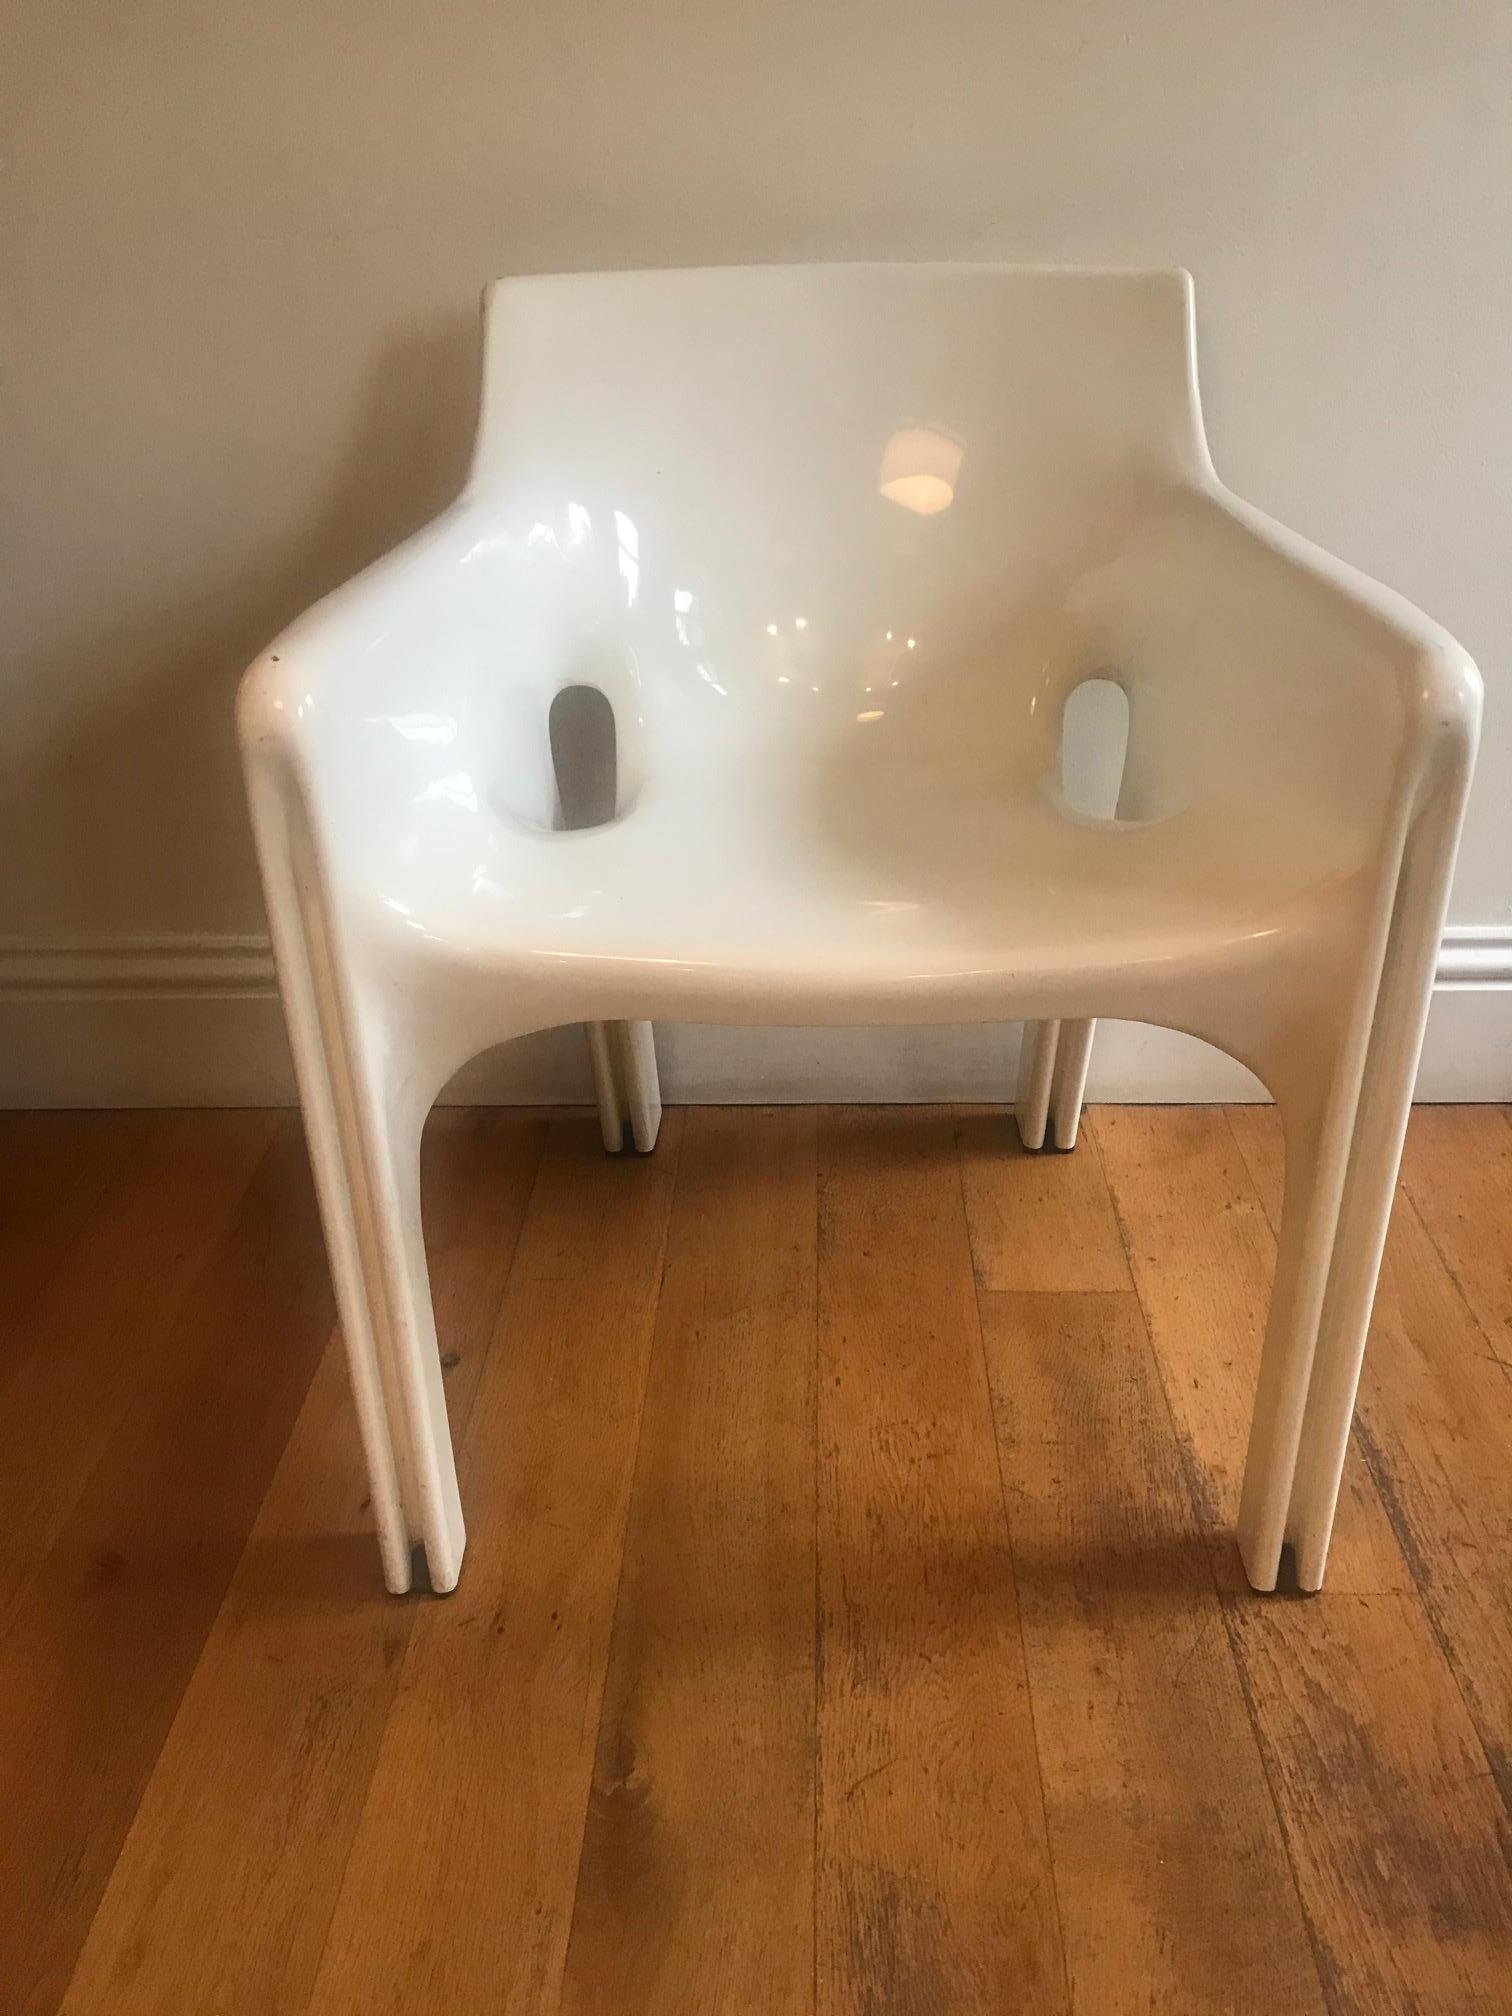 A white moulded plastic Gaudi chair designed by Vico Magistretti. Designed in 1970 by Magistretti and produced by Artemide in Milan, Italy.